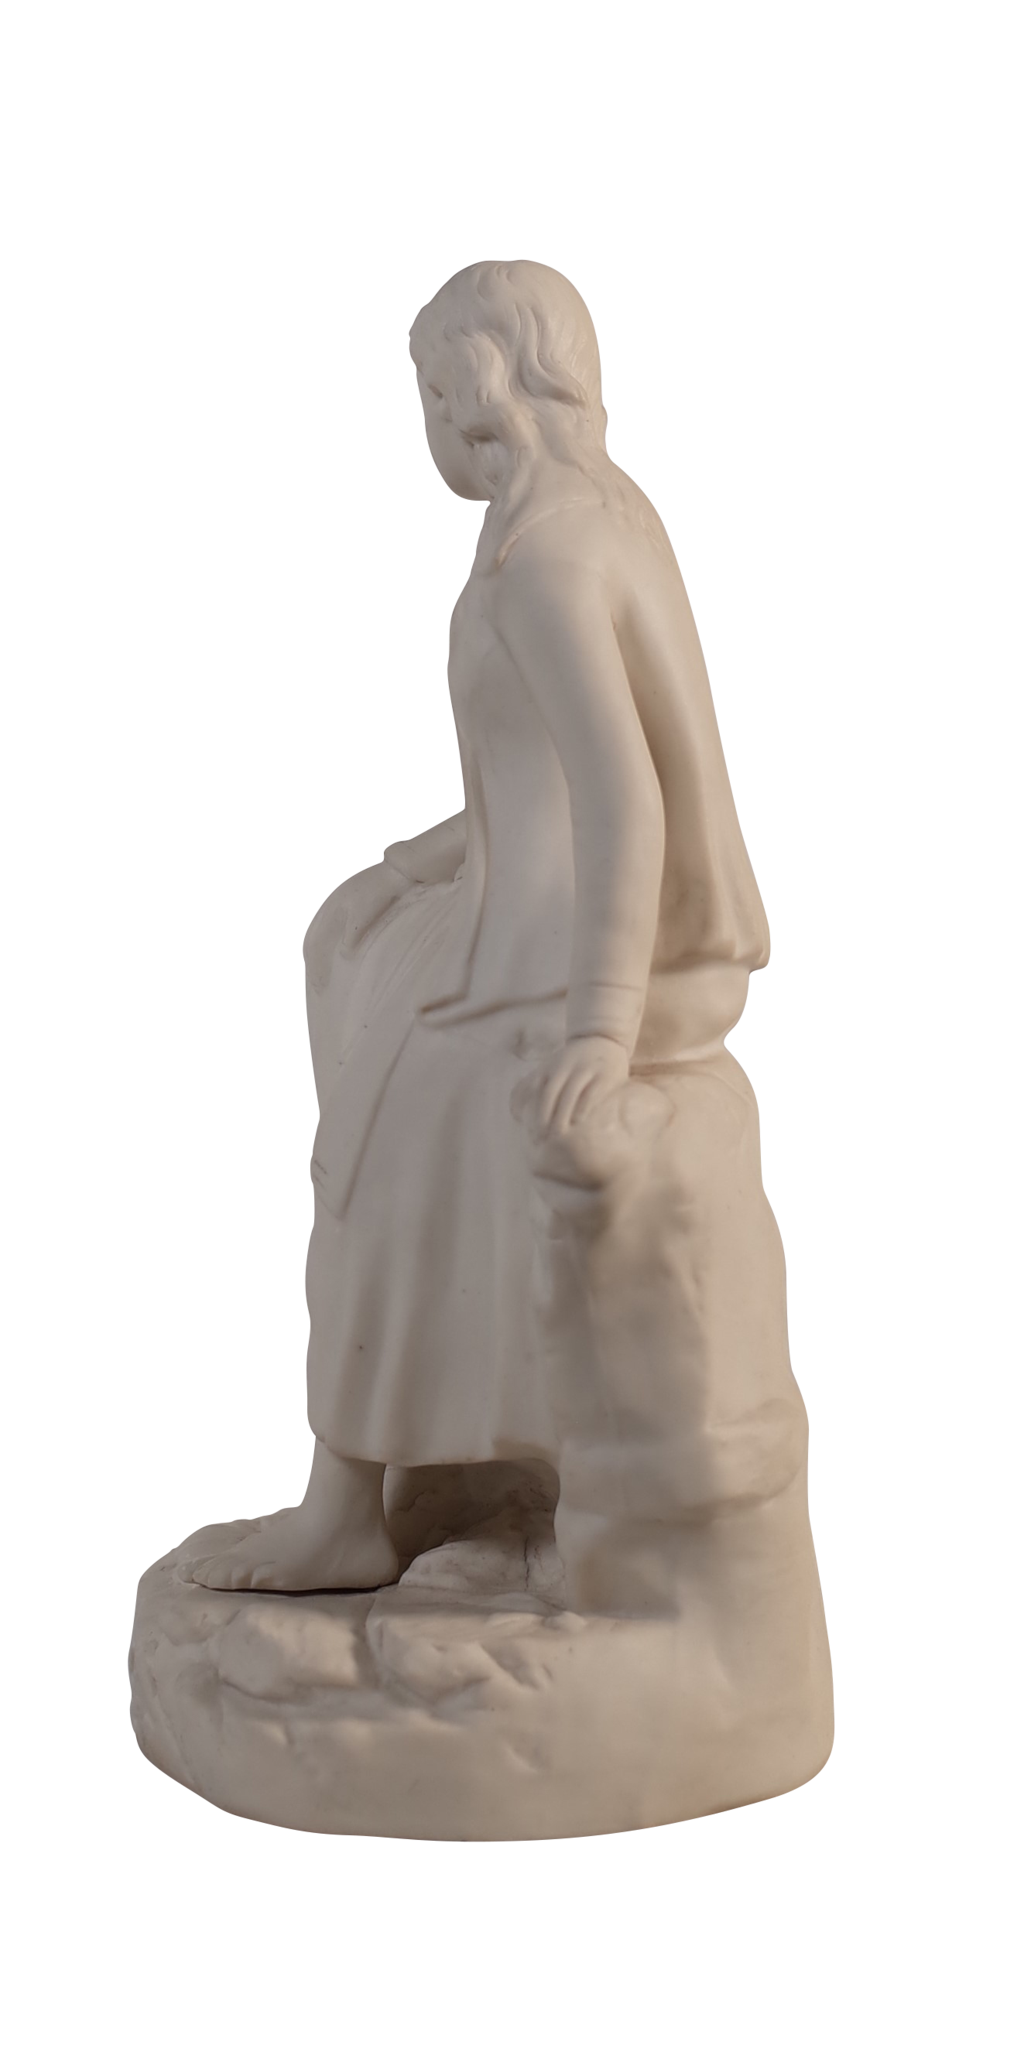 Parian Ware Figure of a Cottage Girl Seated on a Rocky Mound by a Well